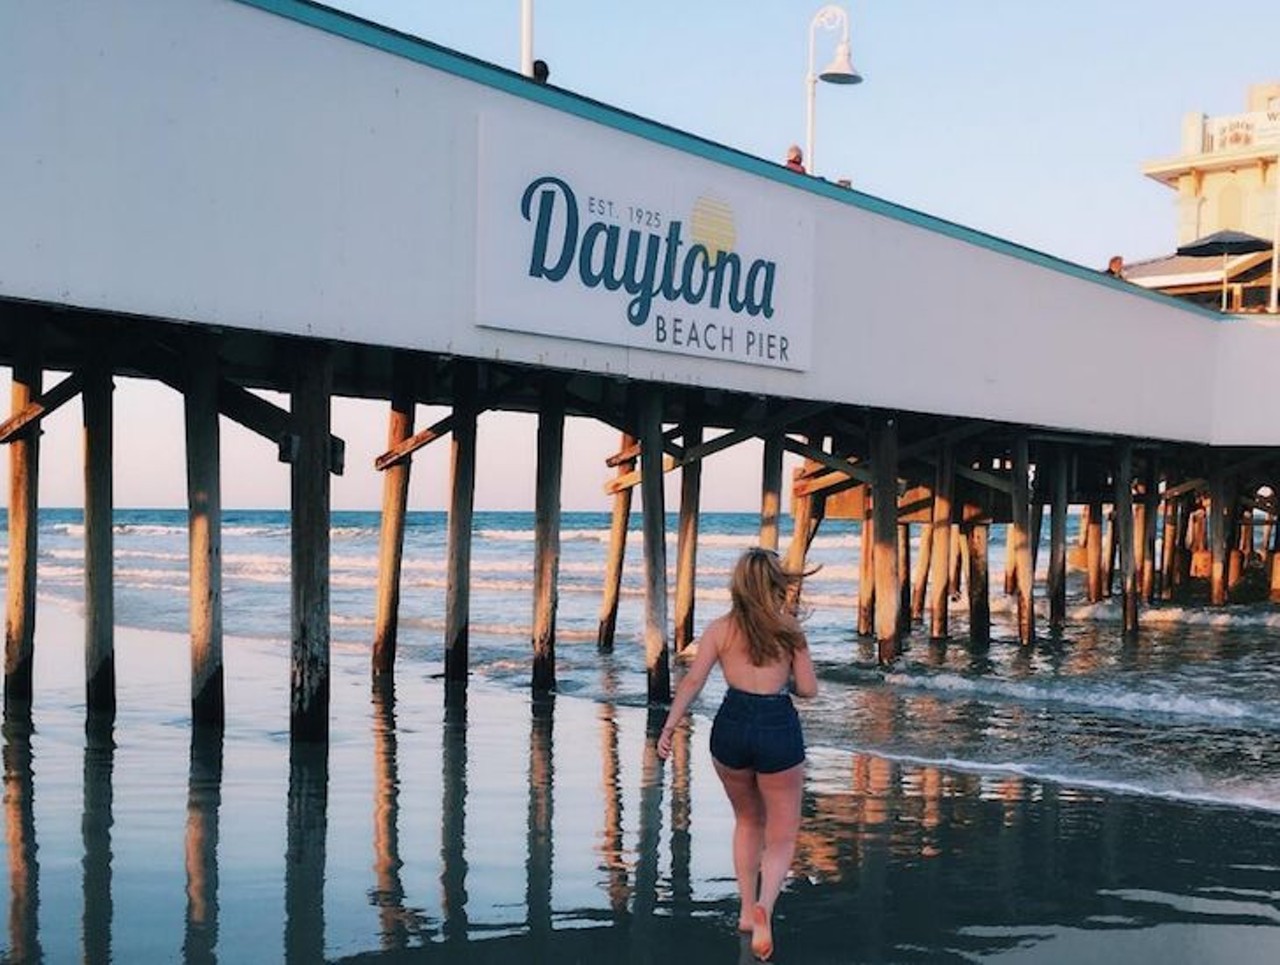 Daytona Beach
1 hour, 15 minutes away
This used to be the spring break capital of the country, but now this beach town&#146;s kitschy stores and wacky people bring a certain charm to any mini-vacation.  
Photo via lydiaplattx/Instagram